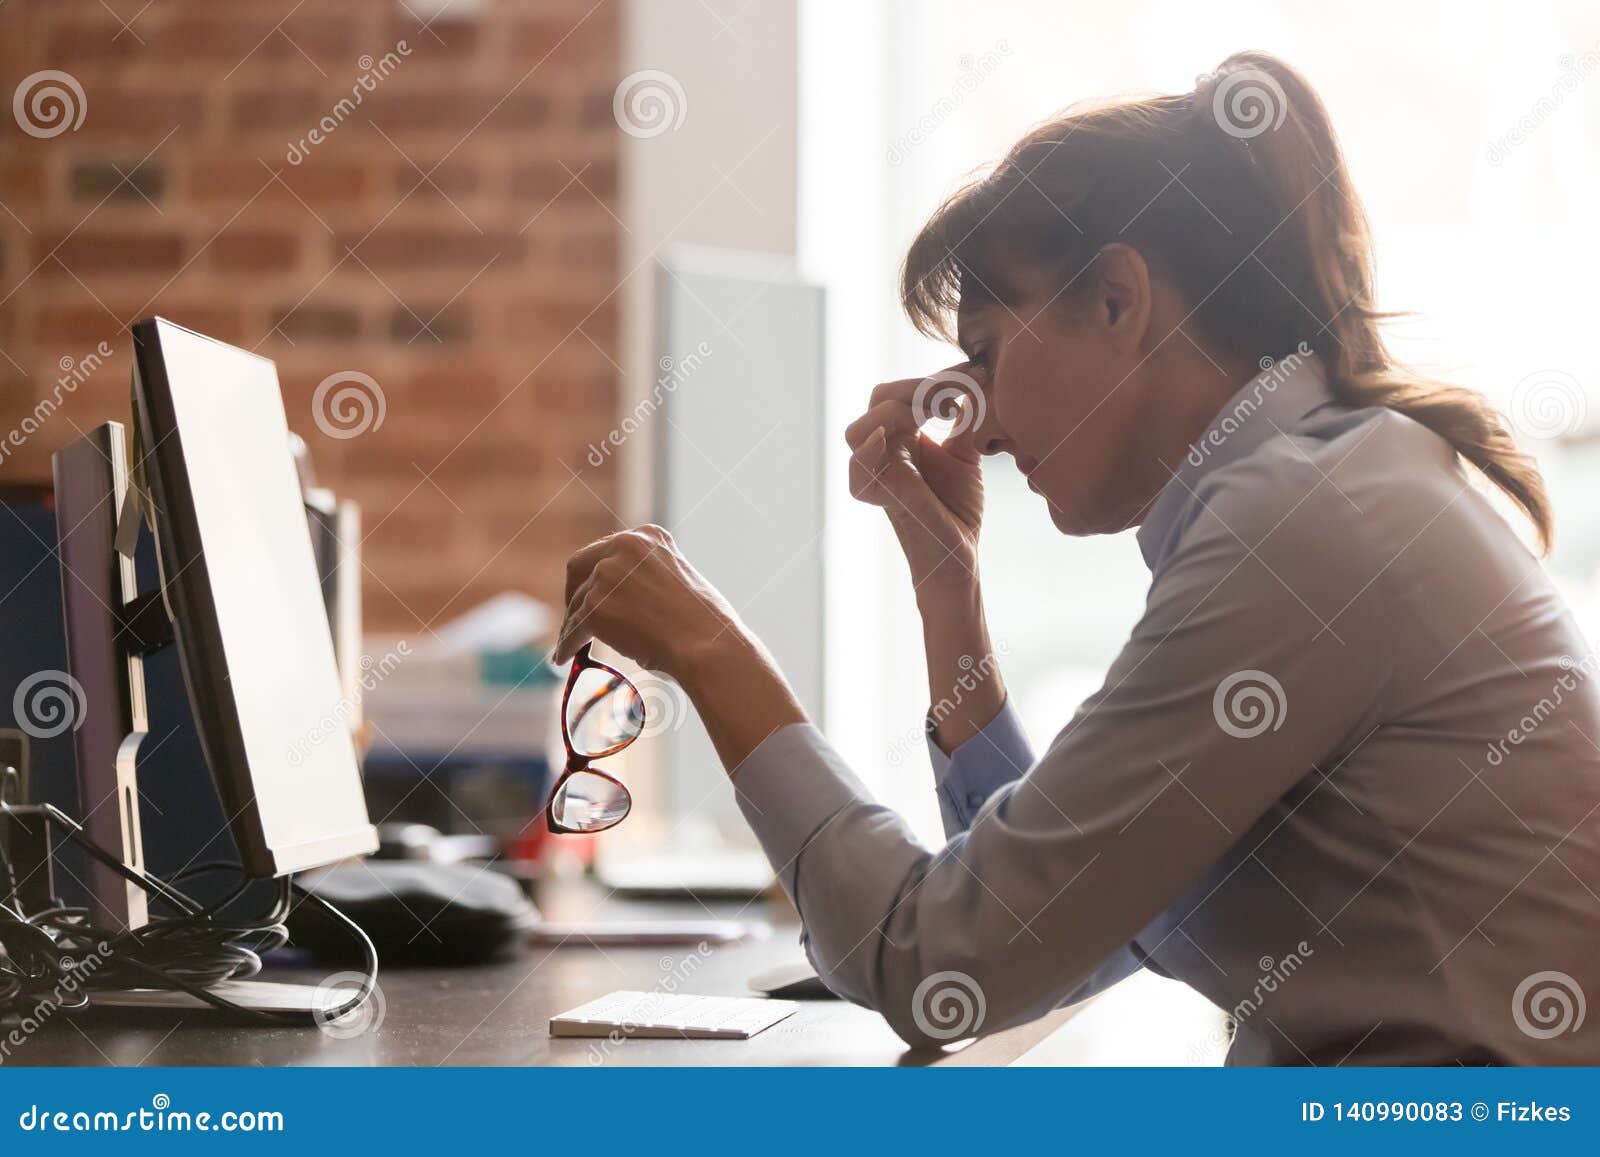 stressed overworked middle aged businesswoman office worker taking off glasses